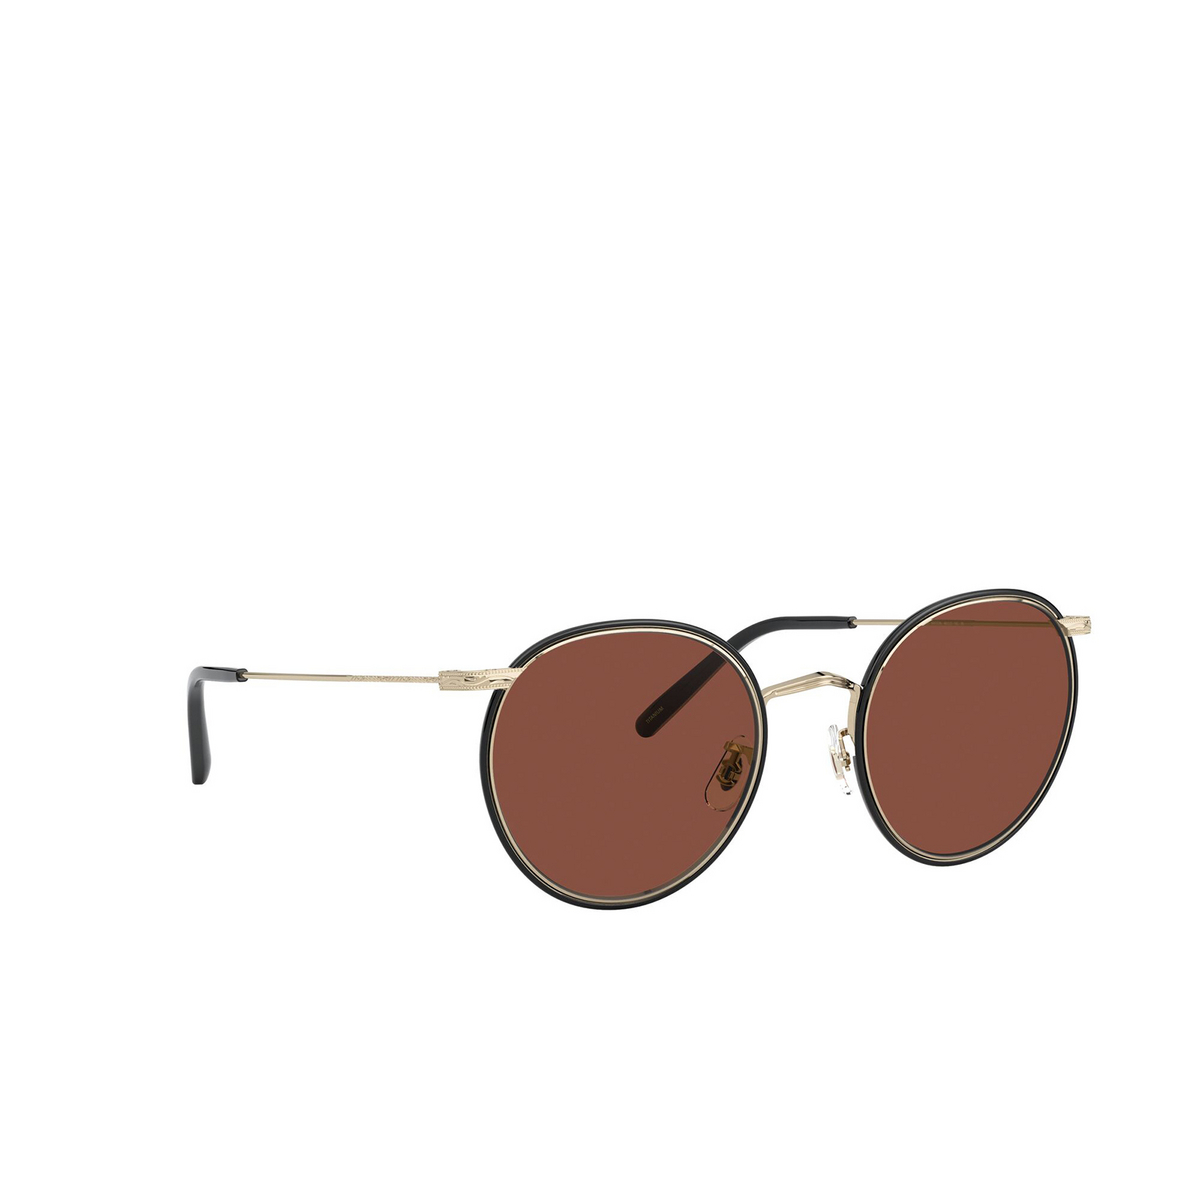 Oliver Peoples® Round Sunglasses: Casson OV1269ST color Soft Gold / Black 5035C5 - three-quarters view.